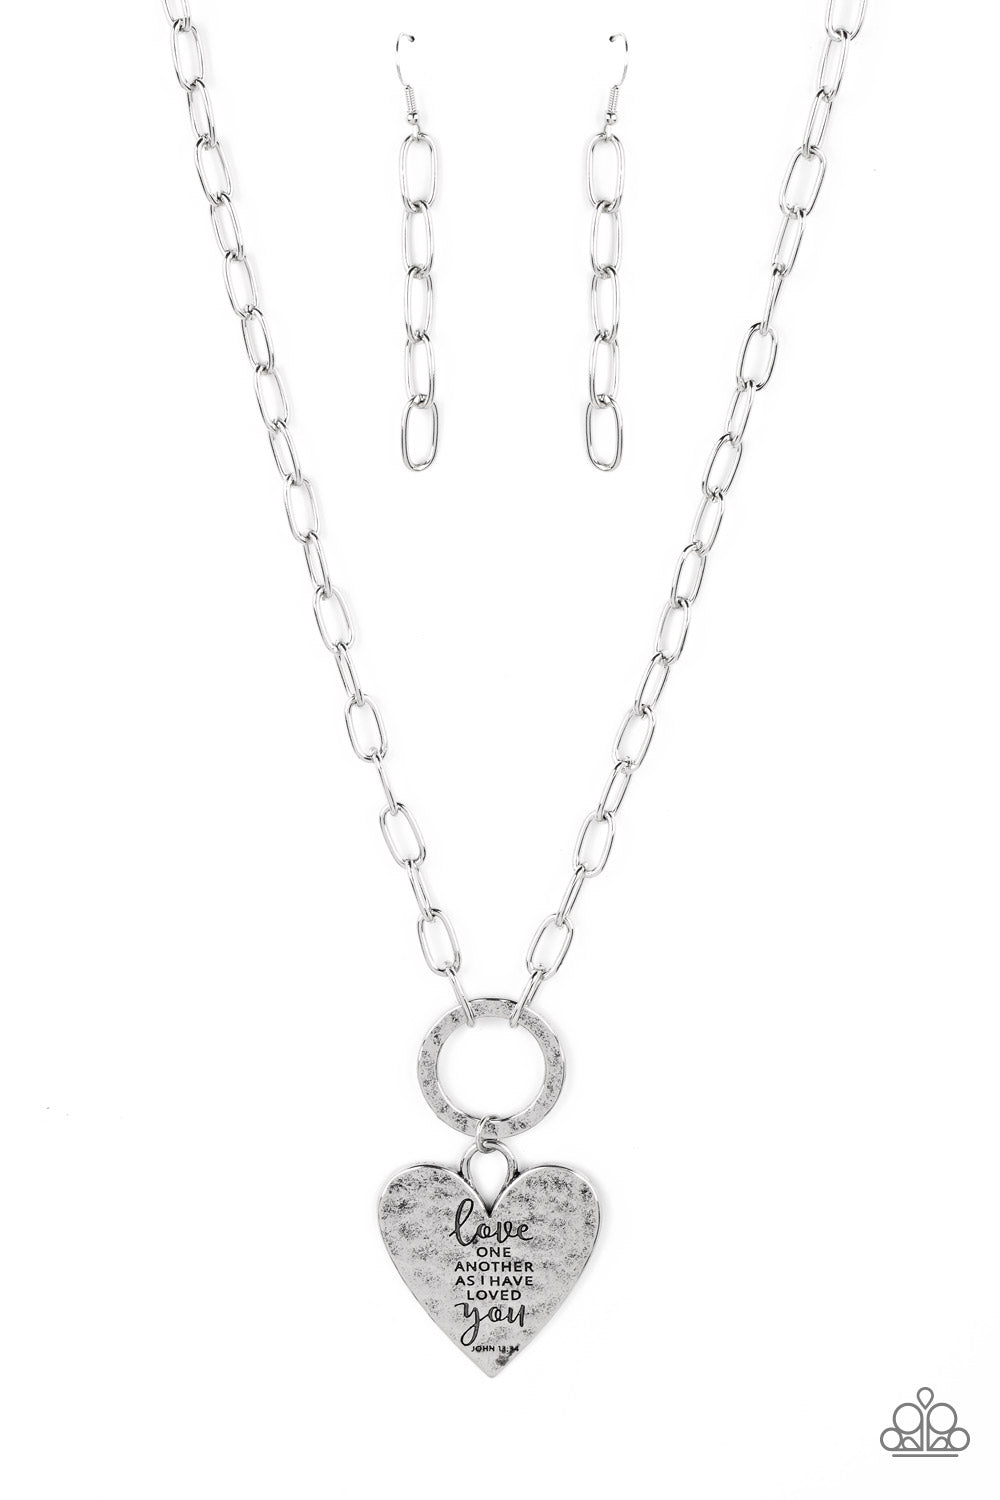 Brotherly Love - Silver (Heart) Necklace